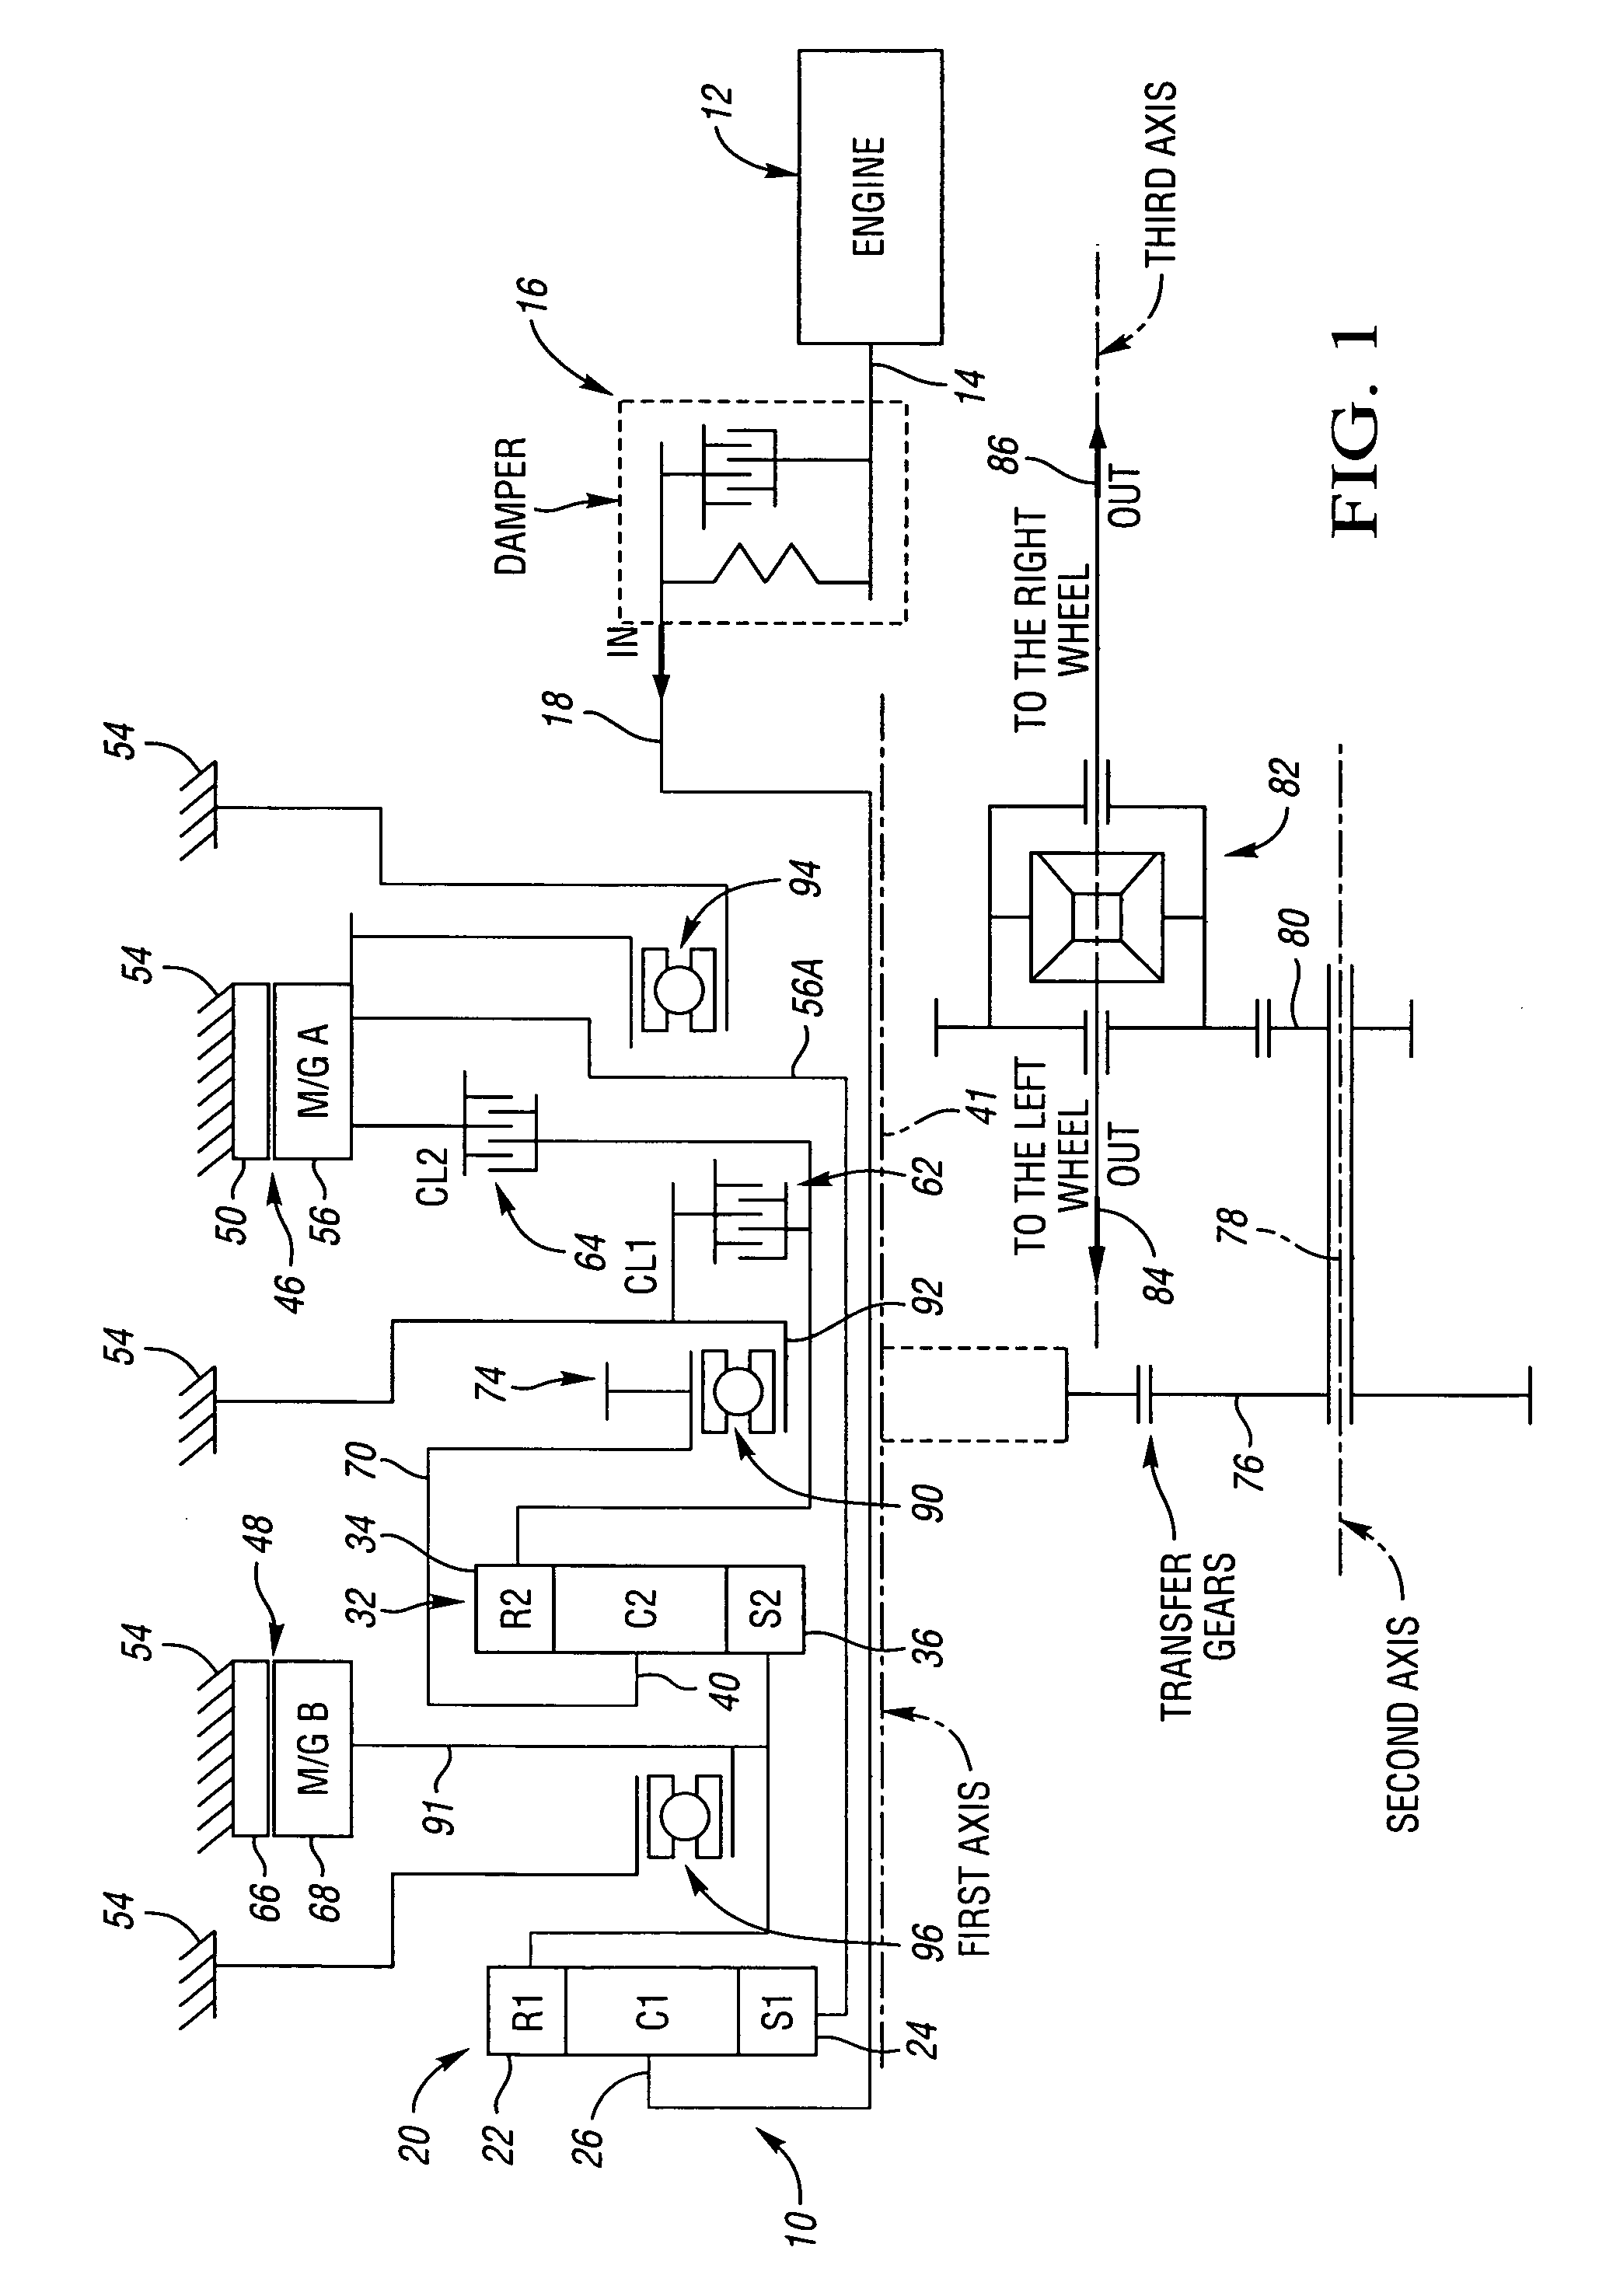 Electrically variable transmission arrangement with transfer gear between gear sets and clutches